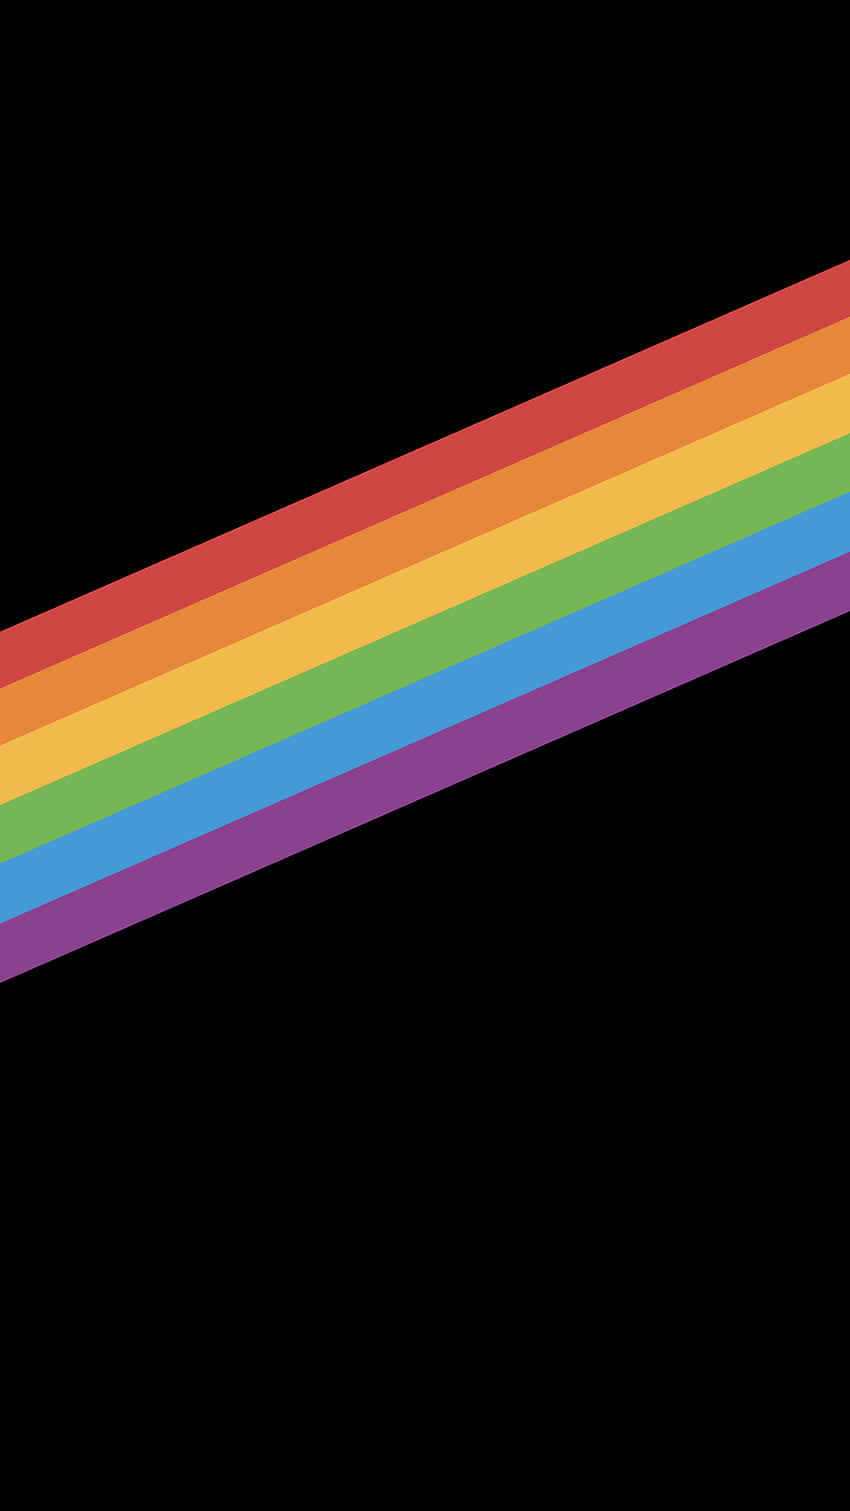 Celebrate Pride with the Rainbow Flag!